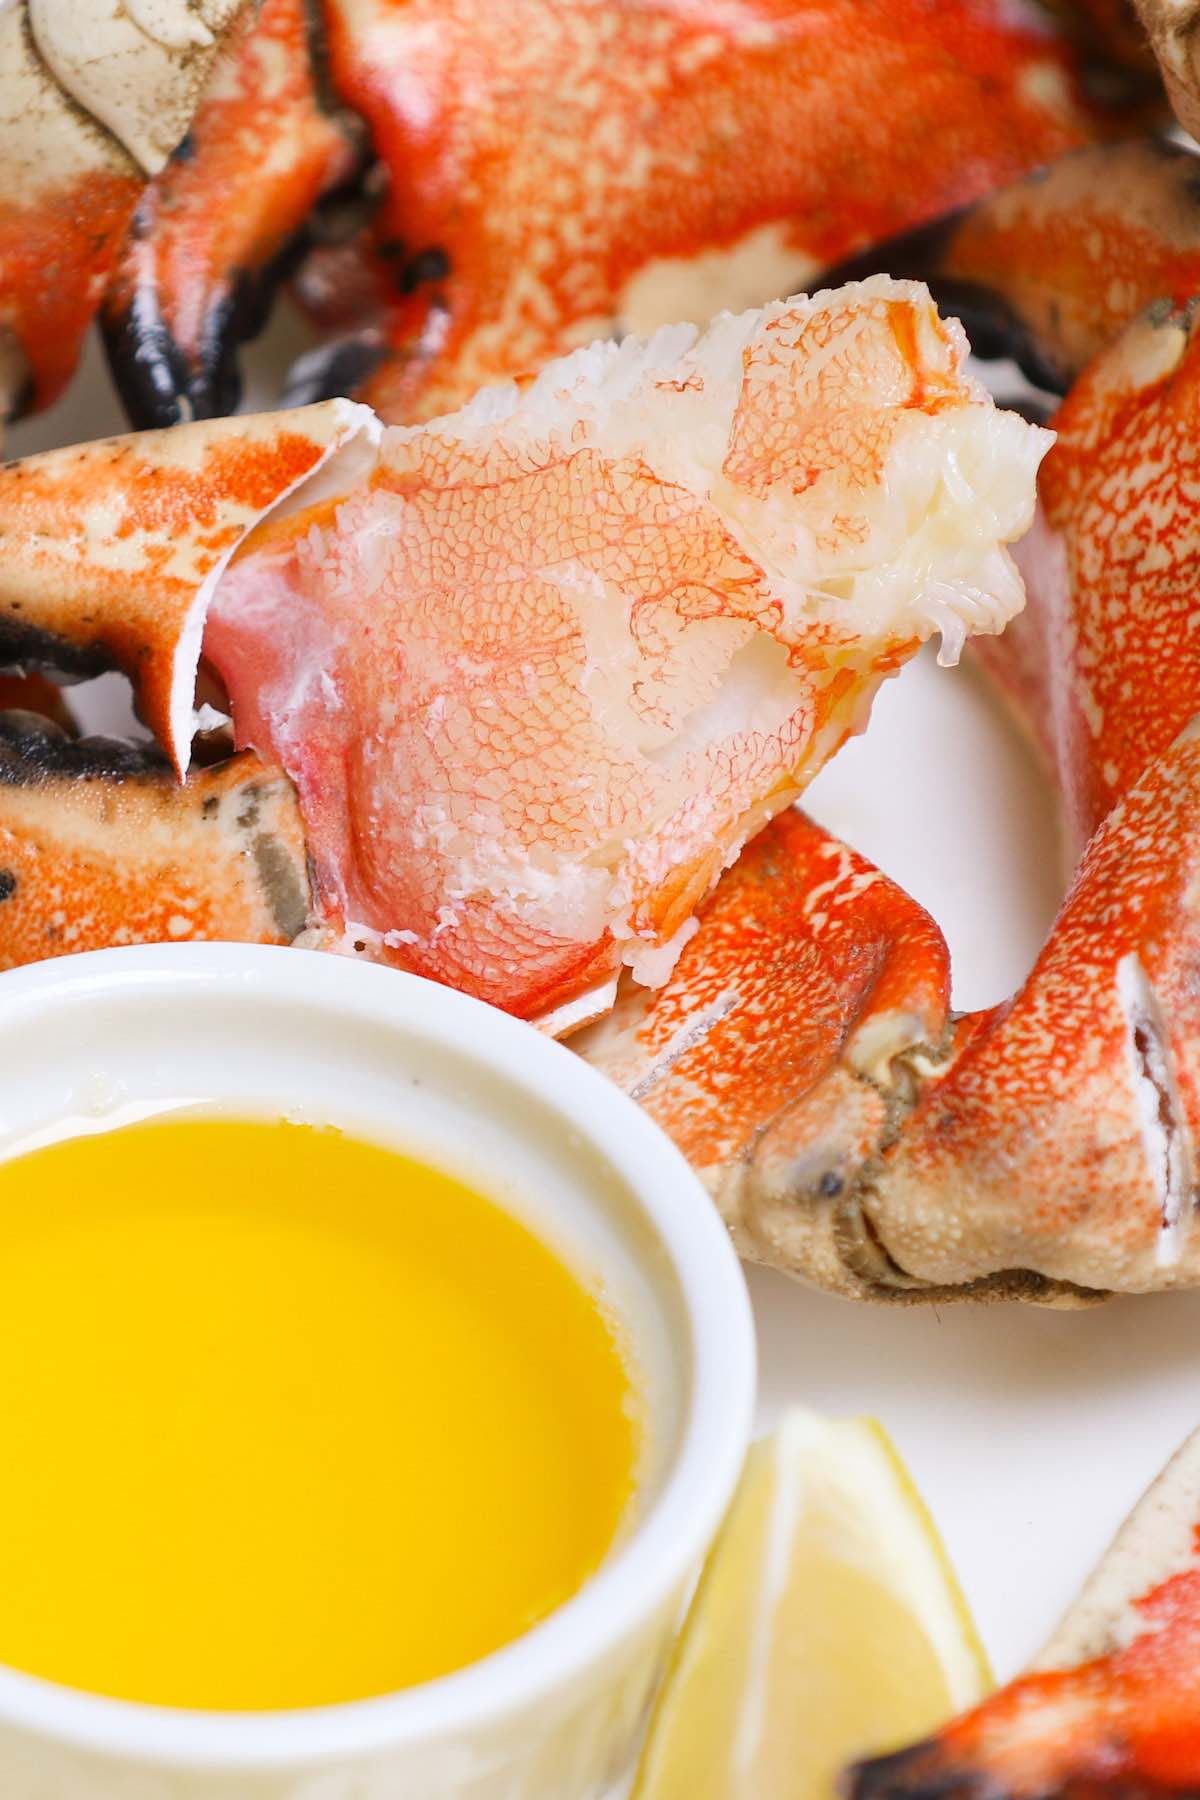 Crab claws cracked open to show the fresh meat inside